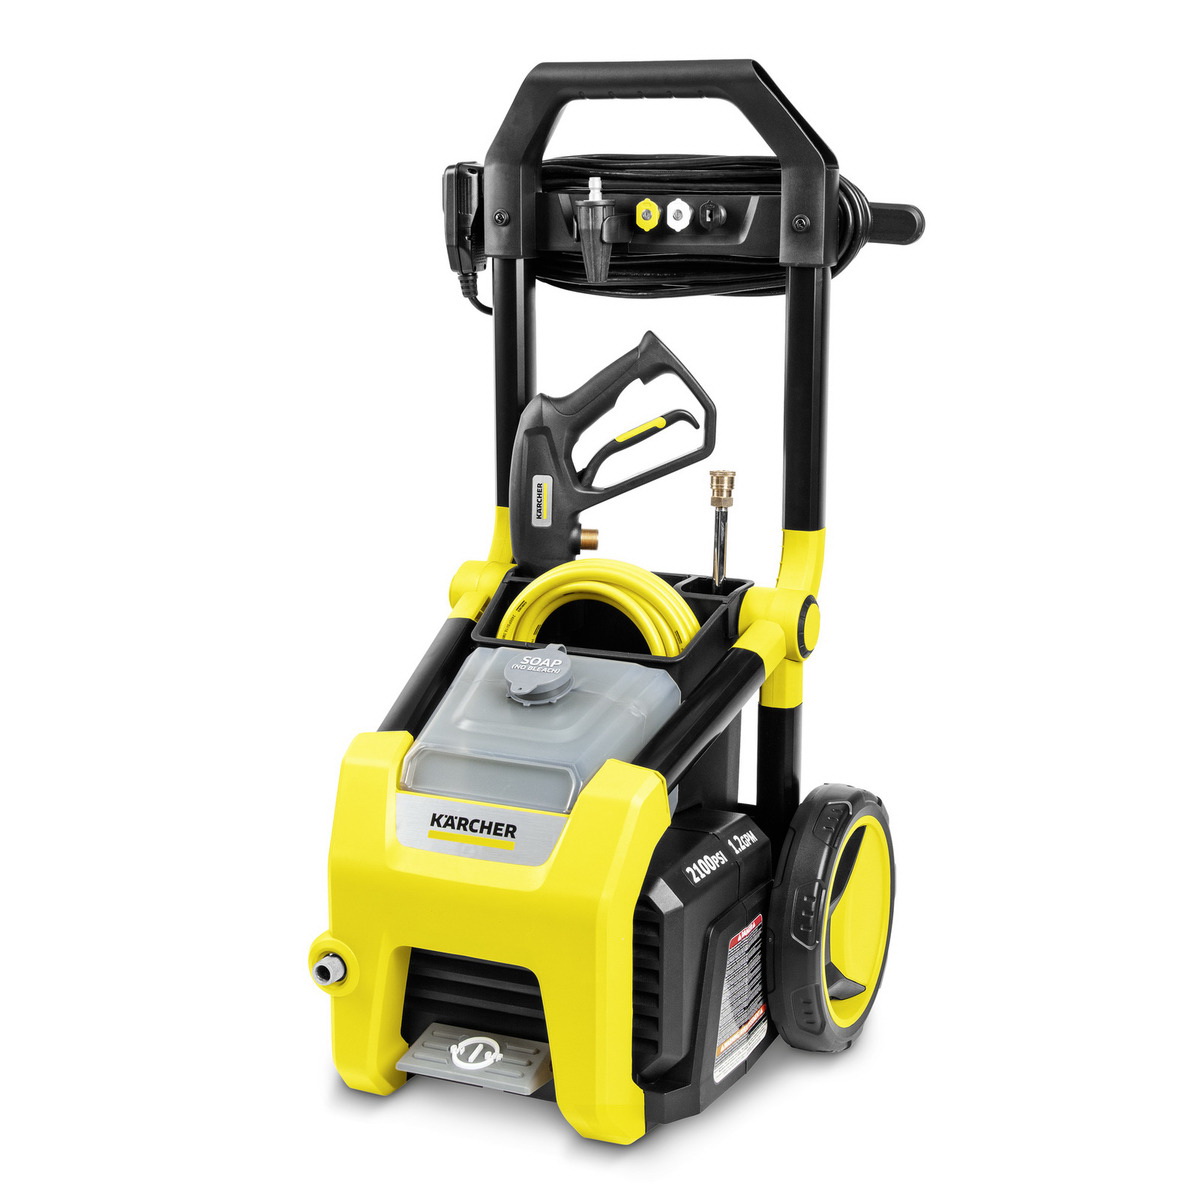 Karcher K2100PS 1.106-220.0 Pressure Washer, 1-Phase, 13 A, 120 V, Axial Cam Pump, 2100 psi Operating, 1.2 gpm - 1